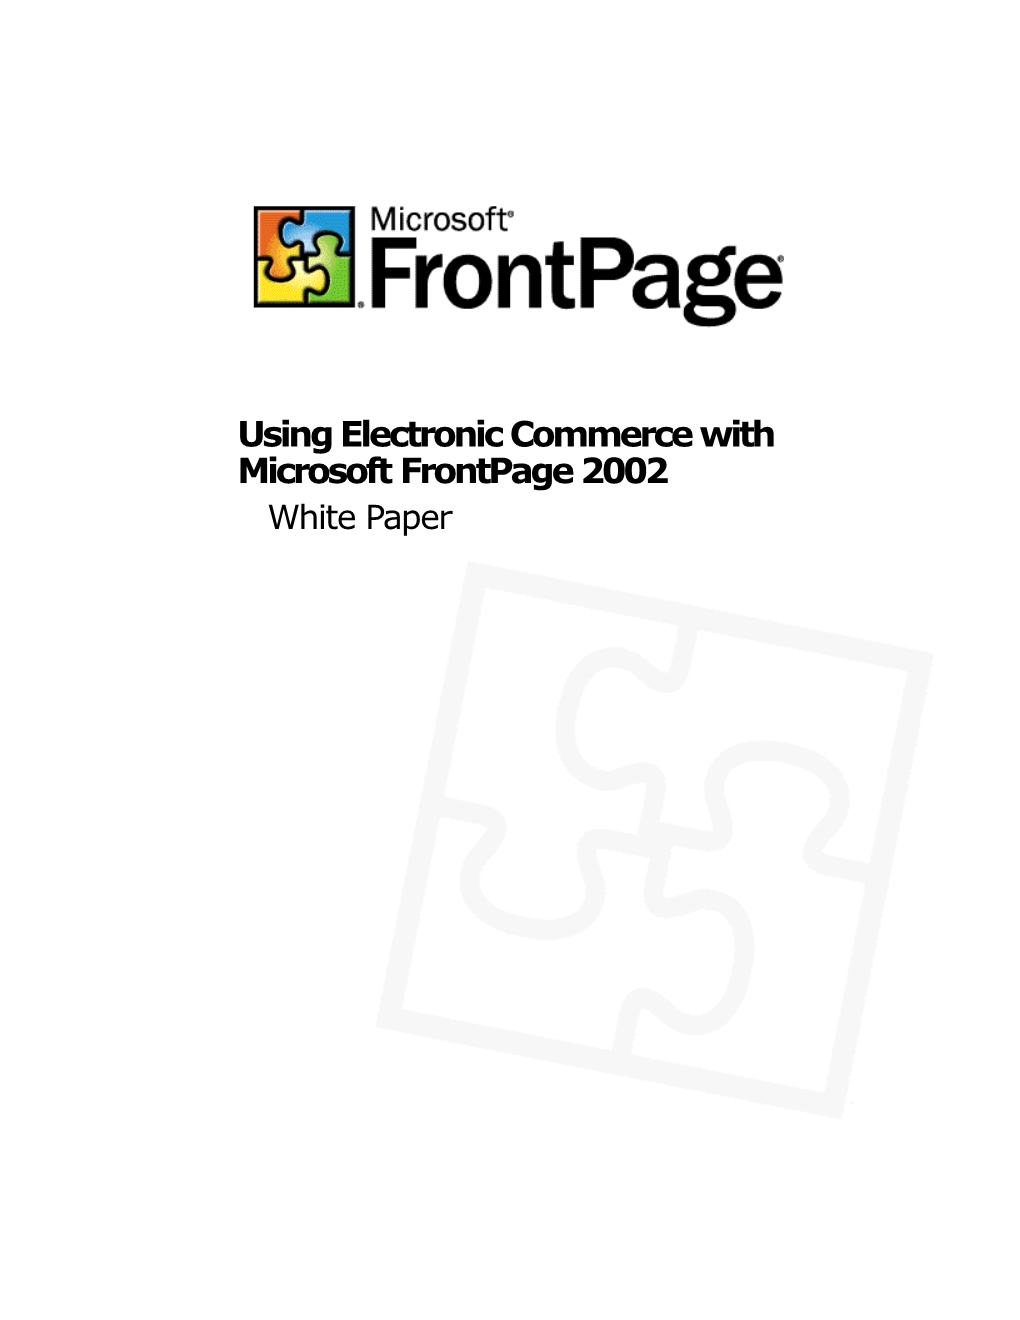 Using Electronic Commerce with Microsoftfrontpage 2002